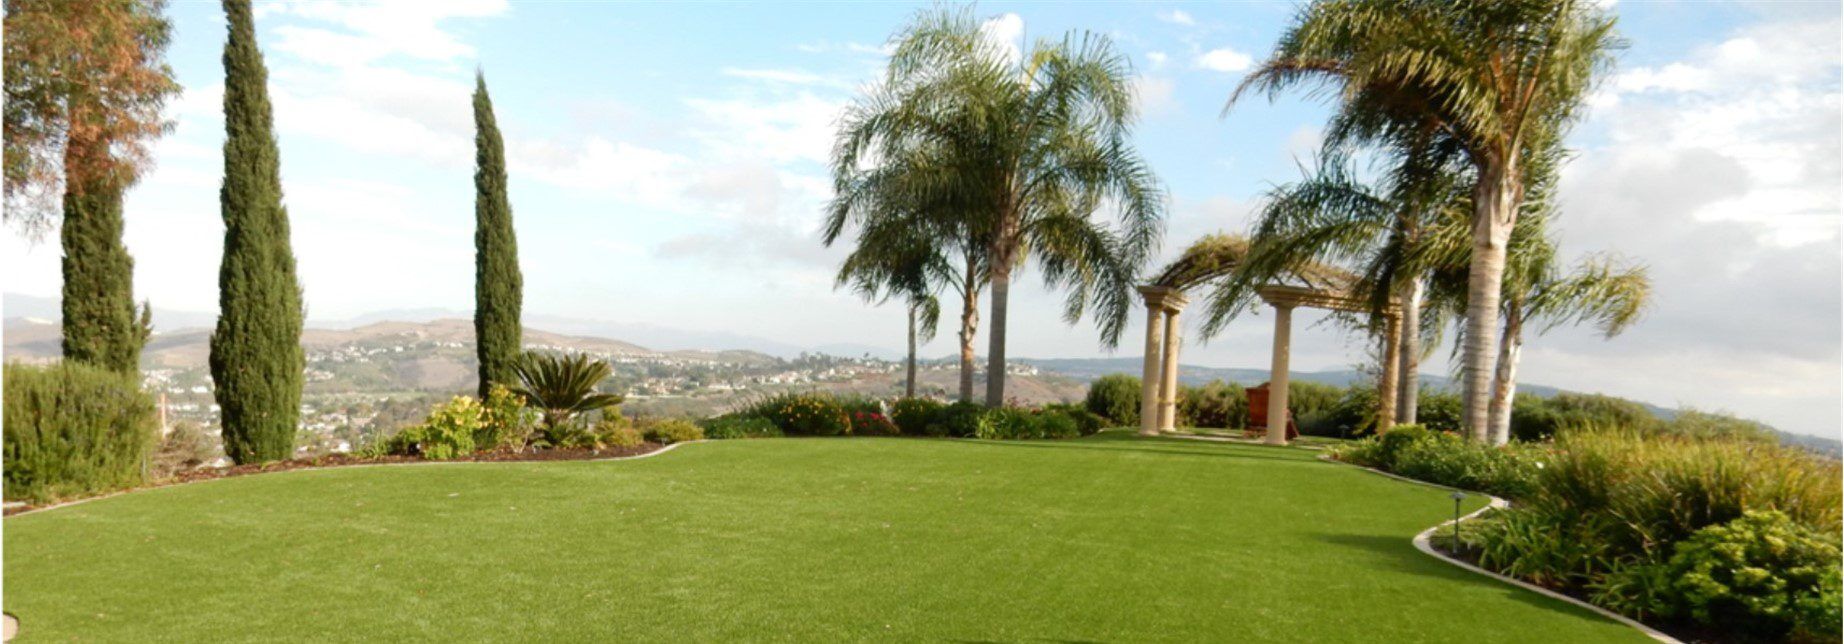 Inland Empire Artificial Grass & Pavers for Outdoor Living Space